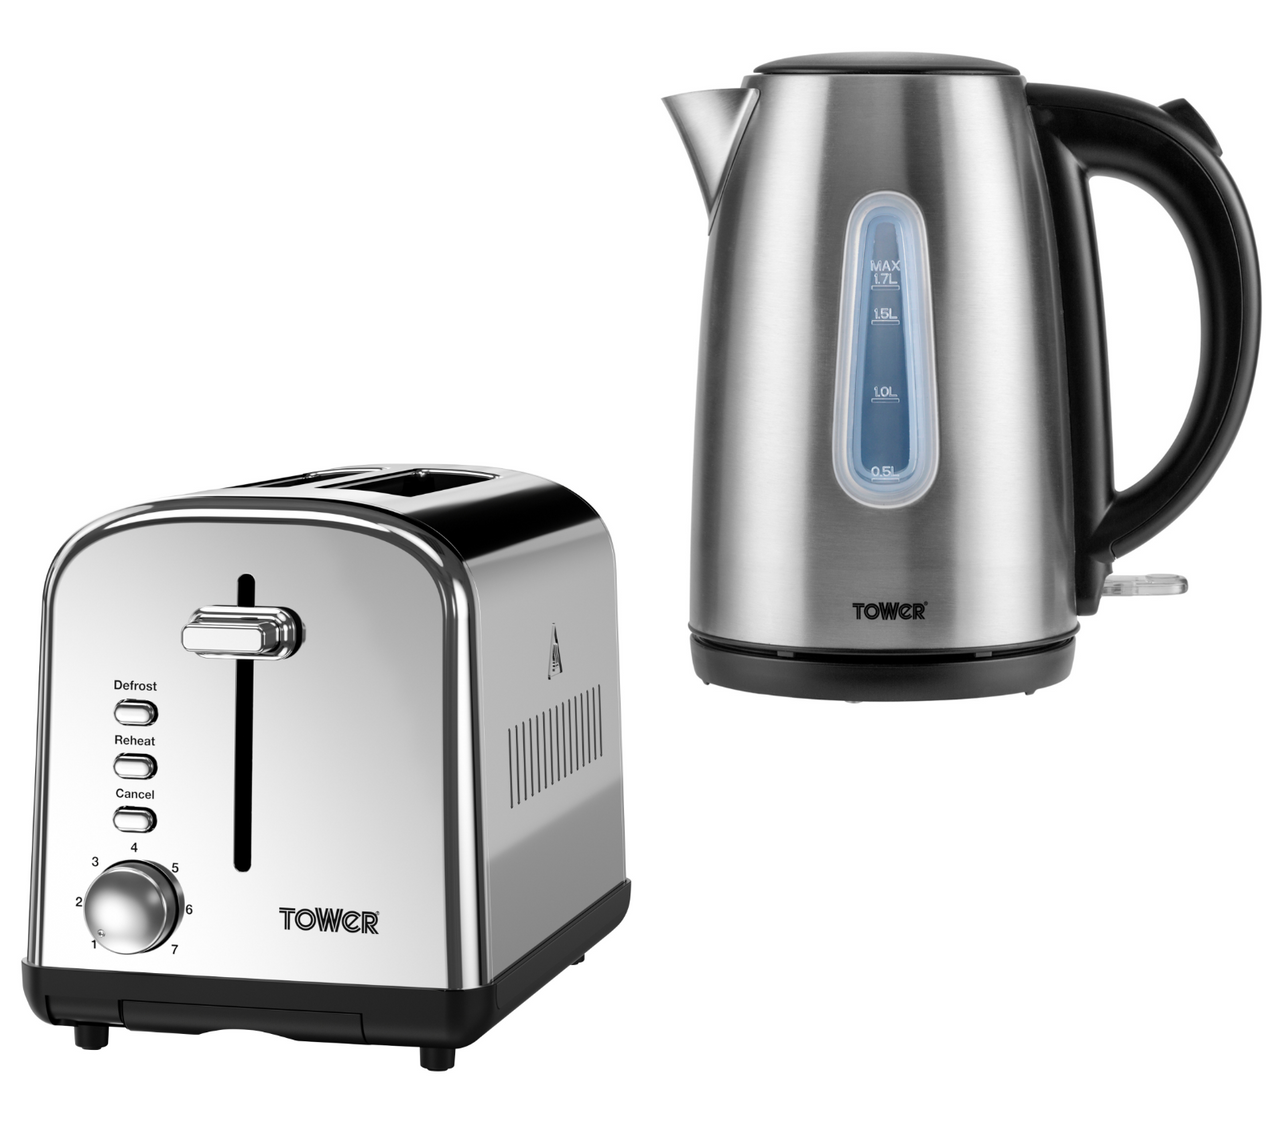 Tower Infinity Brushed Steel 3KW 1.7L Kettle & 2 Slice Toaster Matching Set